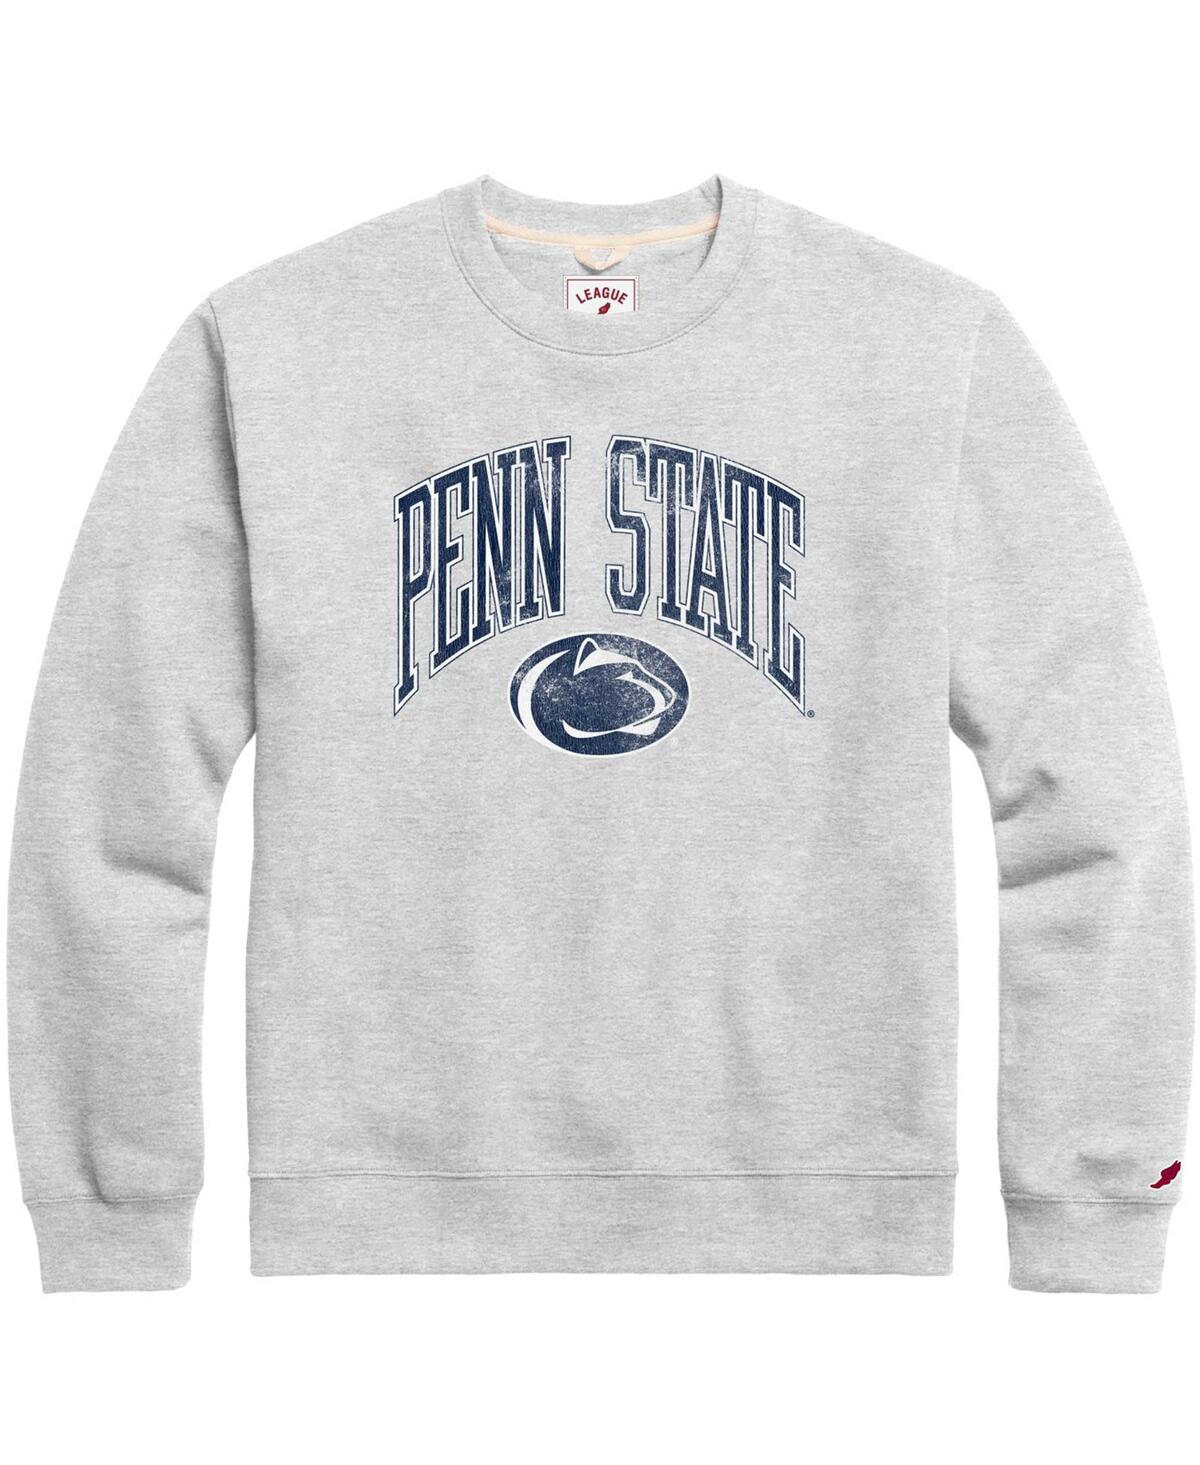 Men's League Collegiate Wear Heather Gray Distressed Penn State Nittany Lions Tall Arch Essential Pullover Sweatshirt - Heather Gray